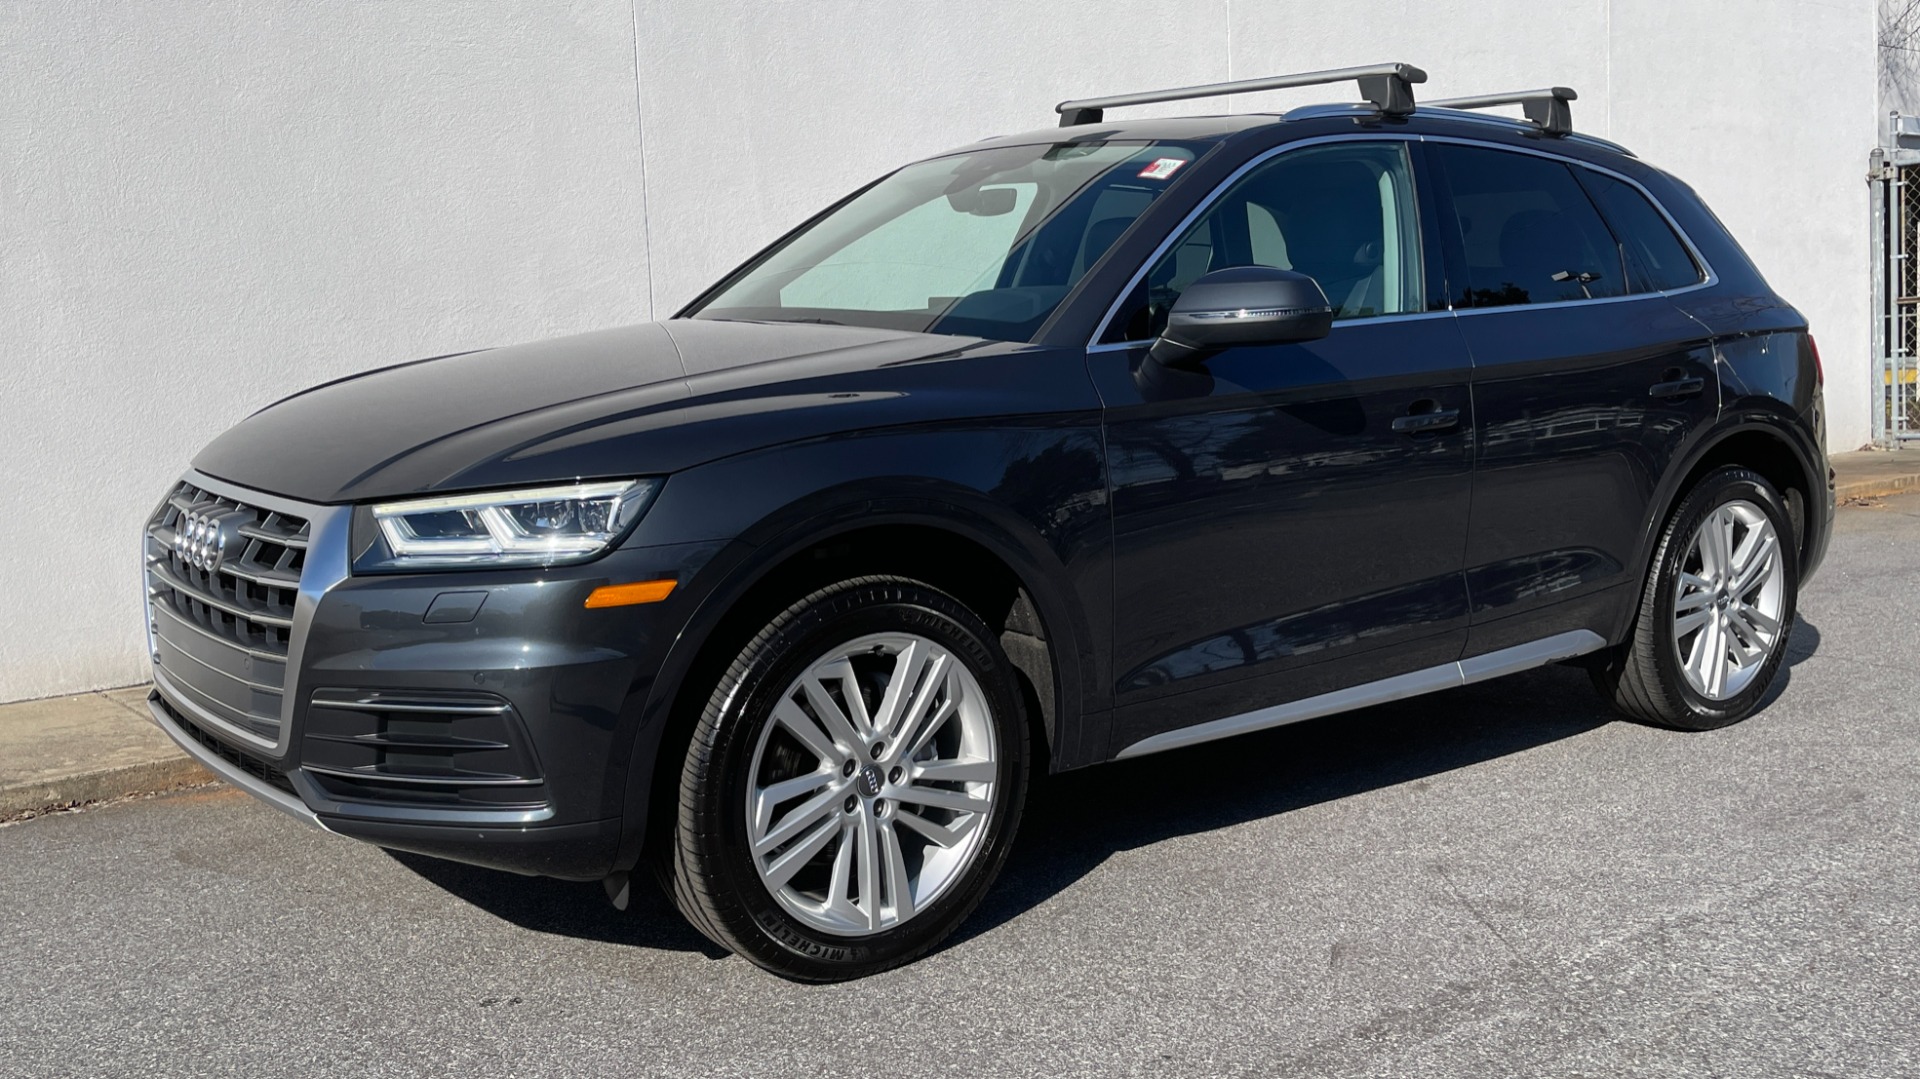 Used 2019 Audi Q5 PREMIUM PLUS / NAV / SUNROOF / WARM WTHR / PARK SYS PLUS / REARVIEW for sale $40,495 at Formula Imports in Charlotte NC 28227 1